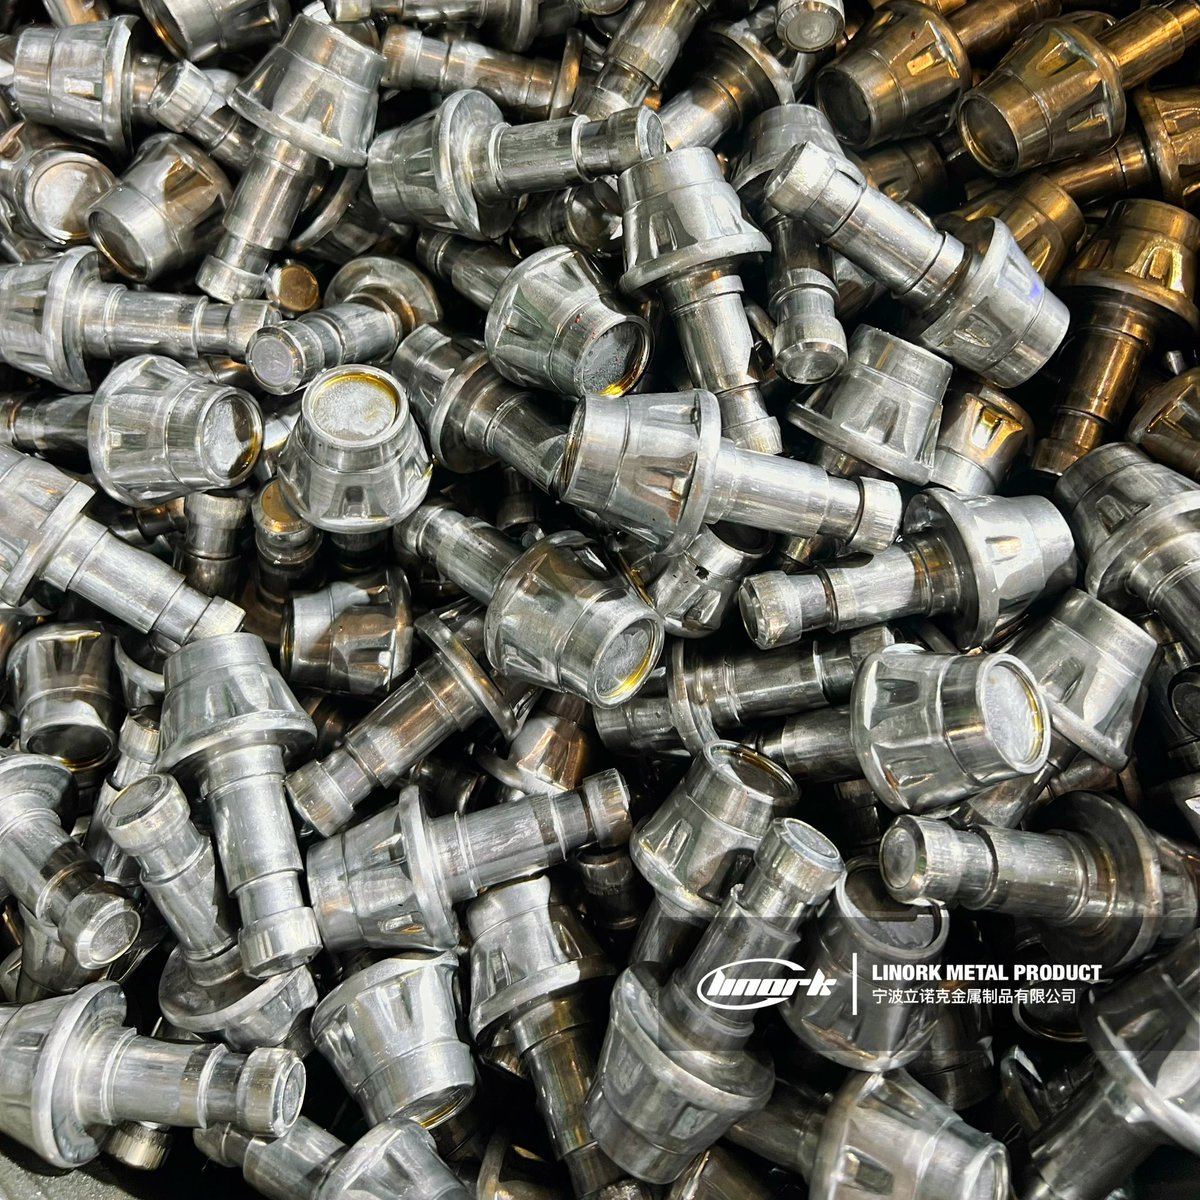 Upgrading fastener research and development technology and improving production processes. Continuously optimizing fastener solutions to safeguard your projects.

linork.com

#linork #manufacturer #specialty #fasteners #solutions #bolt #shaft #customized #hardware